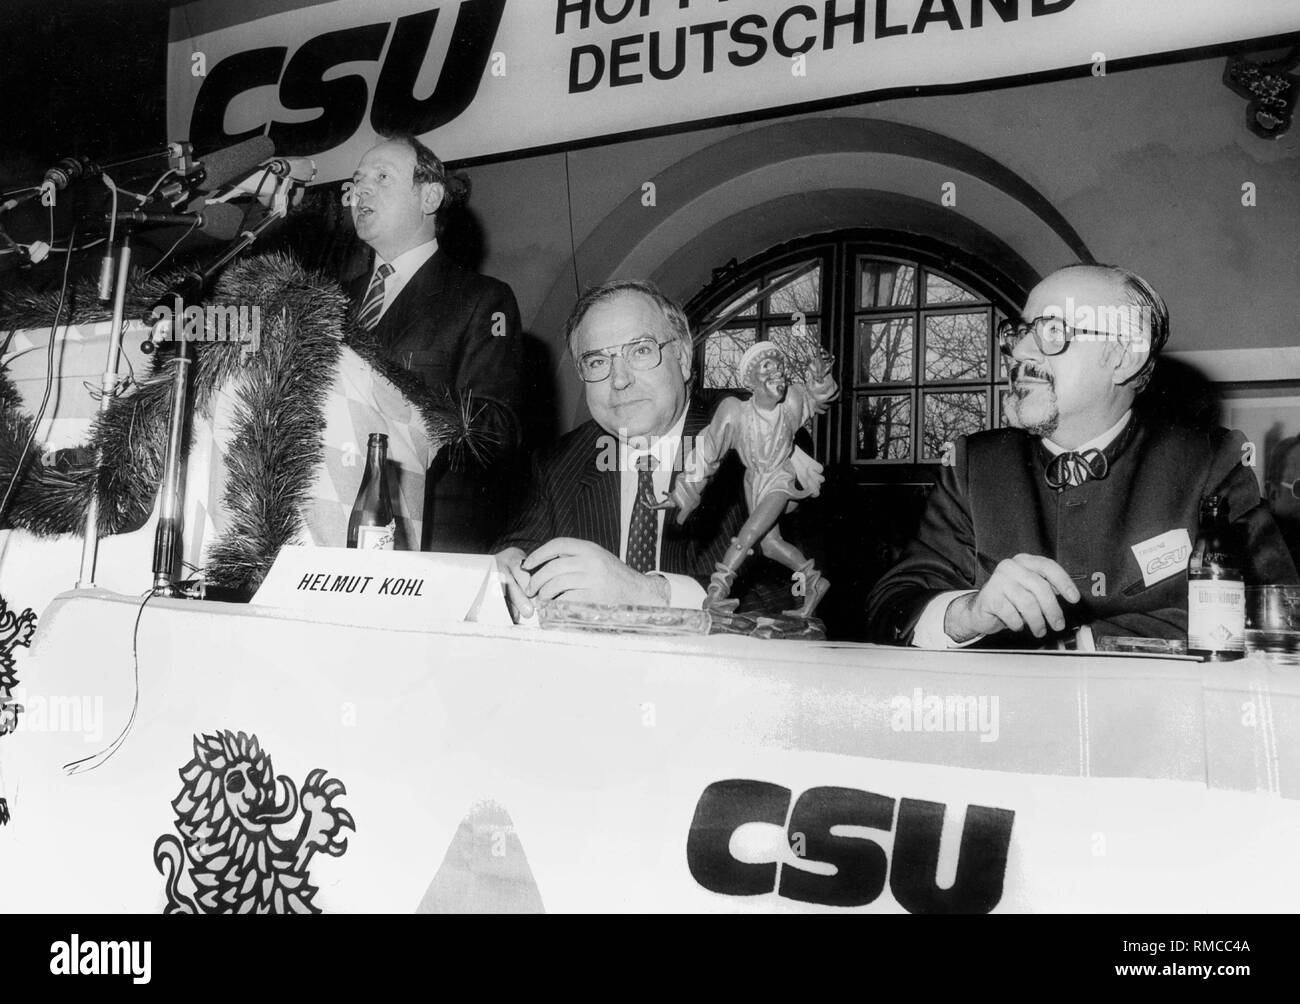 Federal election 1983. Federal Chancellor Helmut Kohl at an election rally of the sister party CSU at the Salvatorkeller in Munich on 25 February. At the lectern mayor Erich Kiesl, on the right Hans Klein, press secretary of the CSU. Between Kohl and Klein the gift of the city: a Morris dancer. Stock Photo